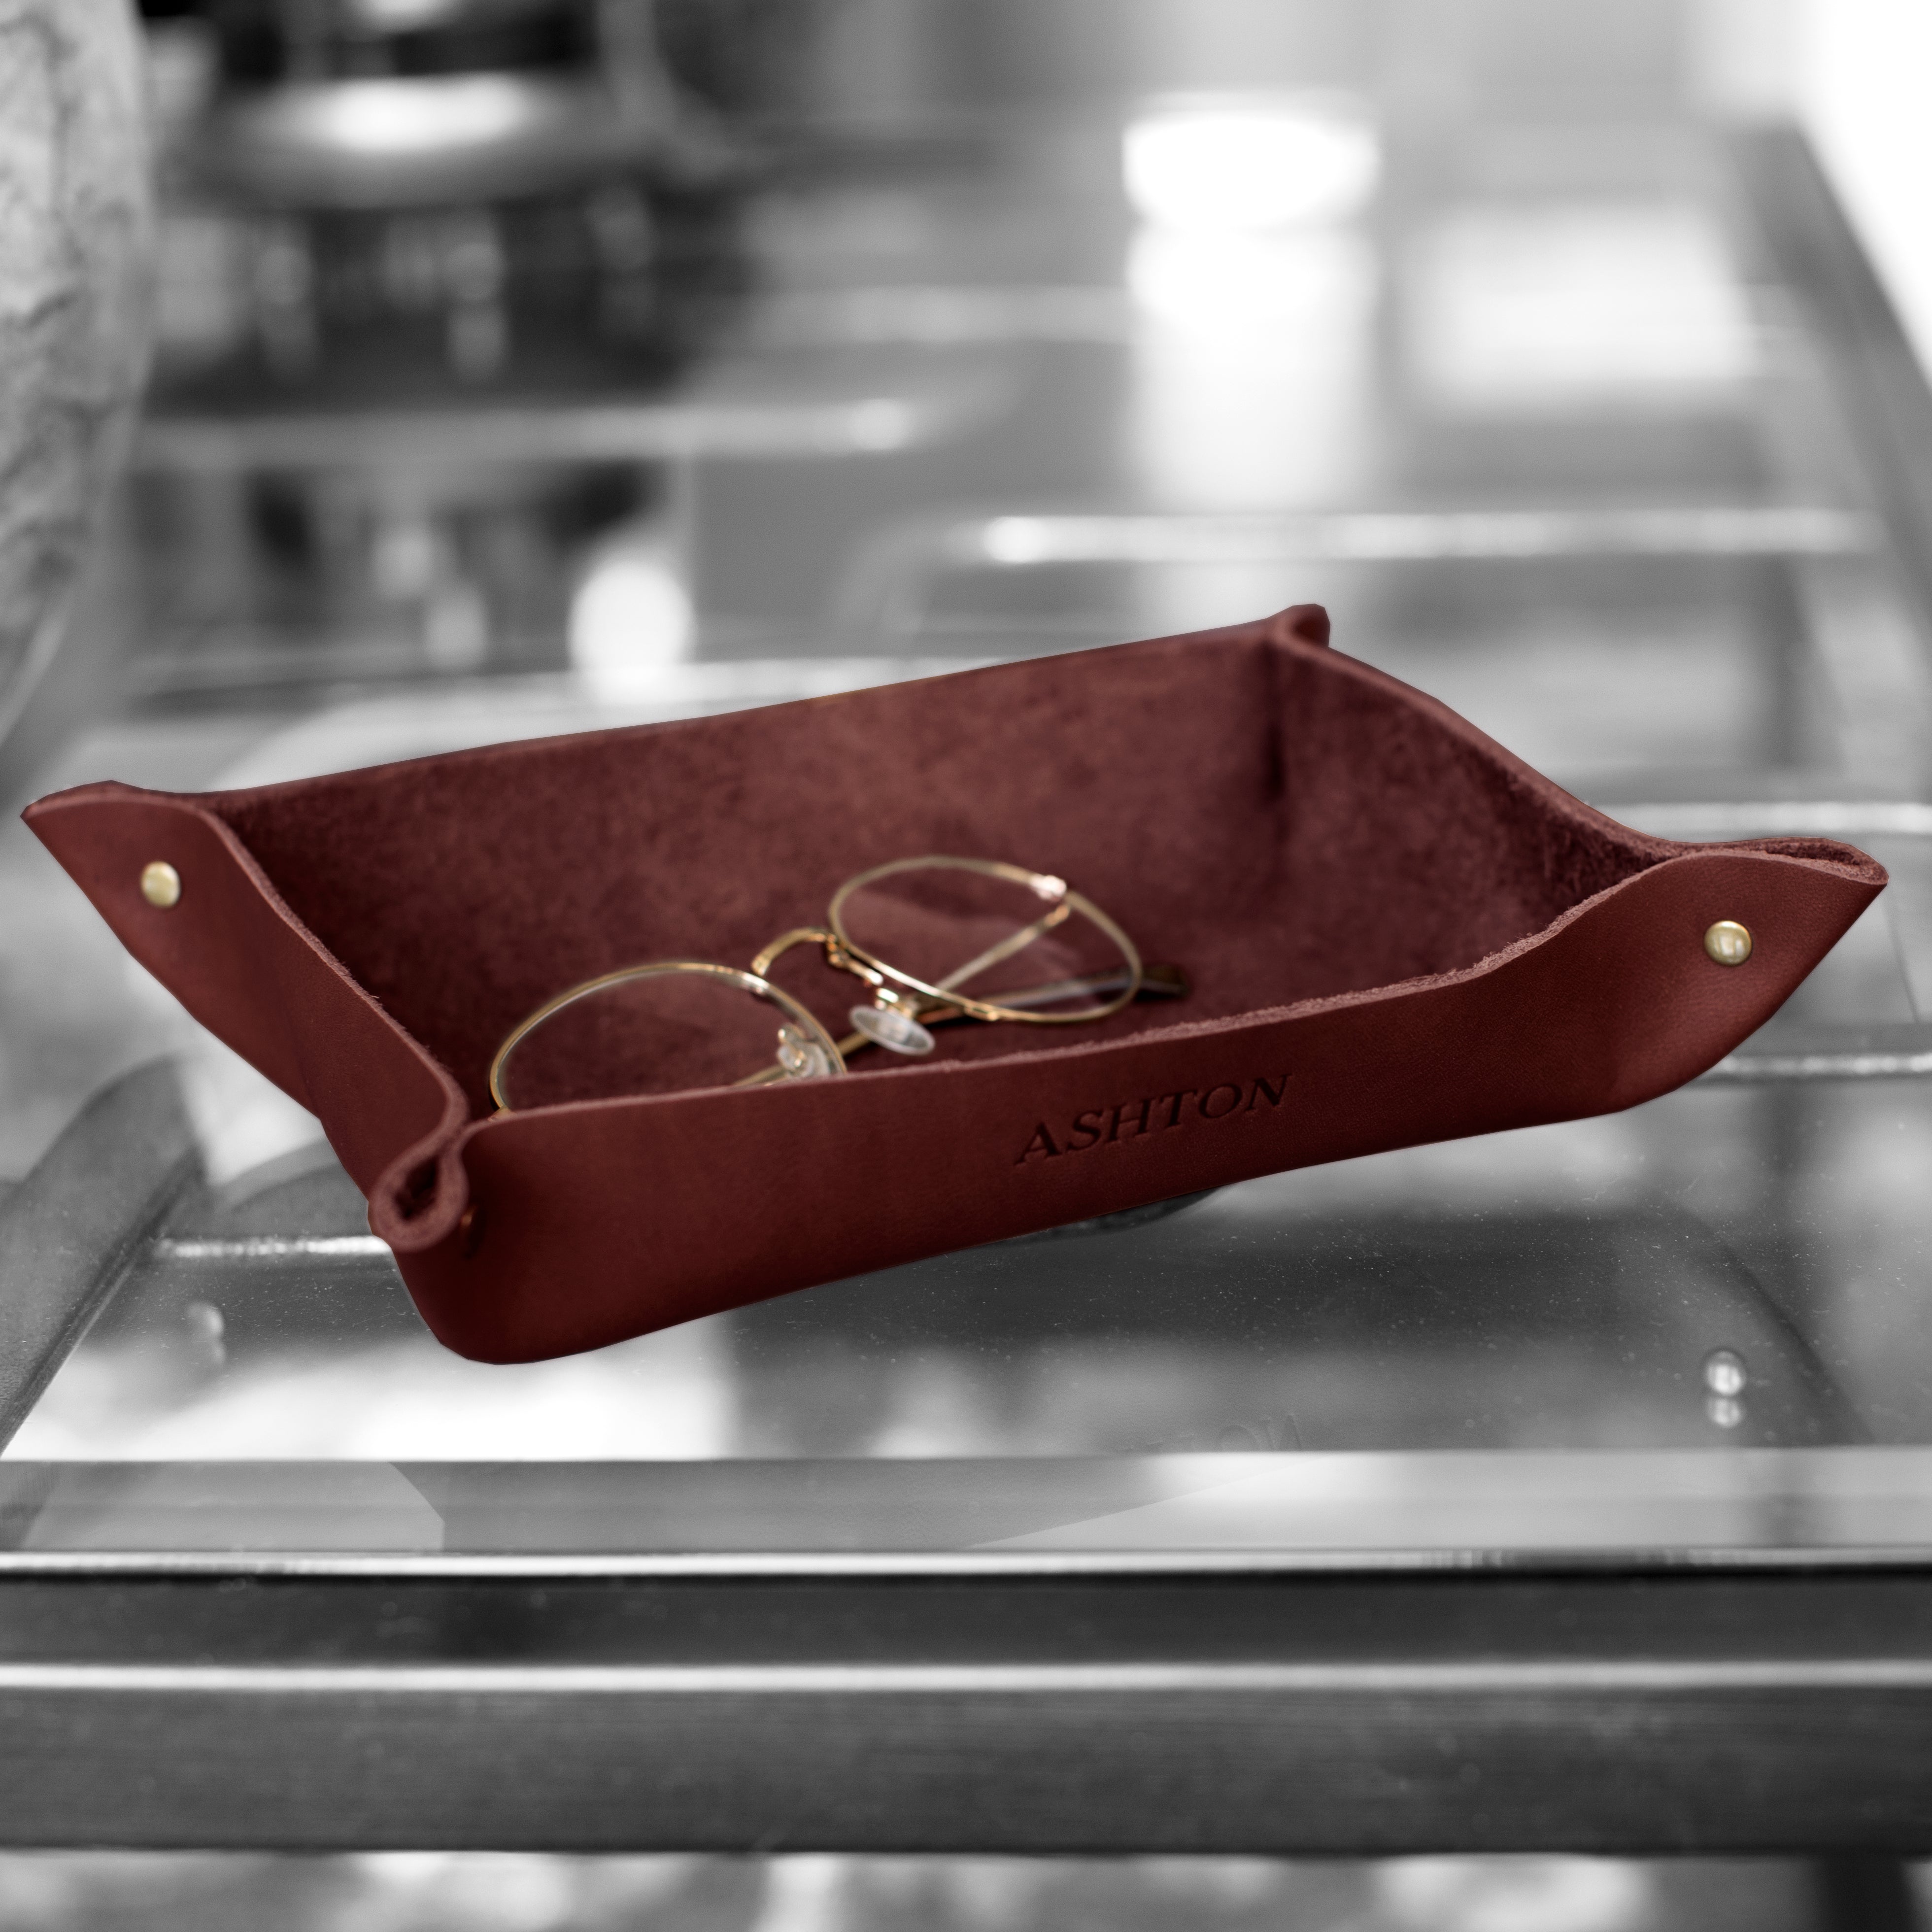 Leather Valet Tray No. 120, Personalized & Handmade in USA